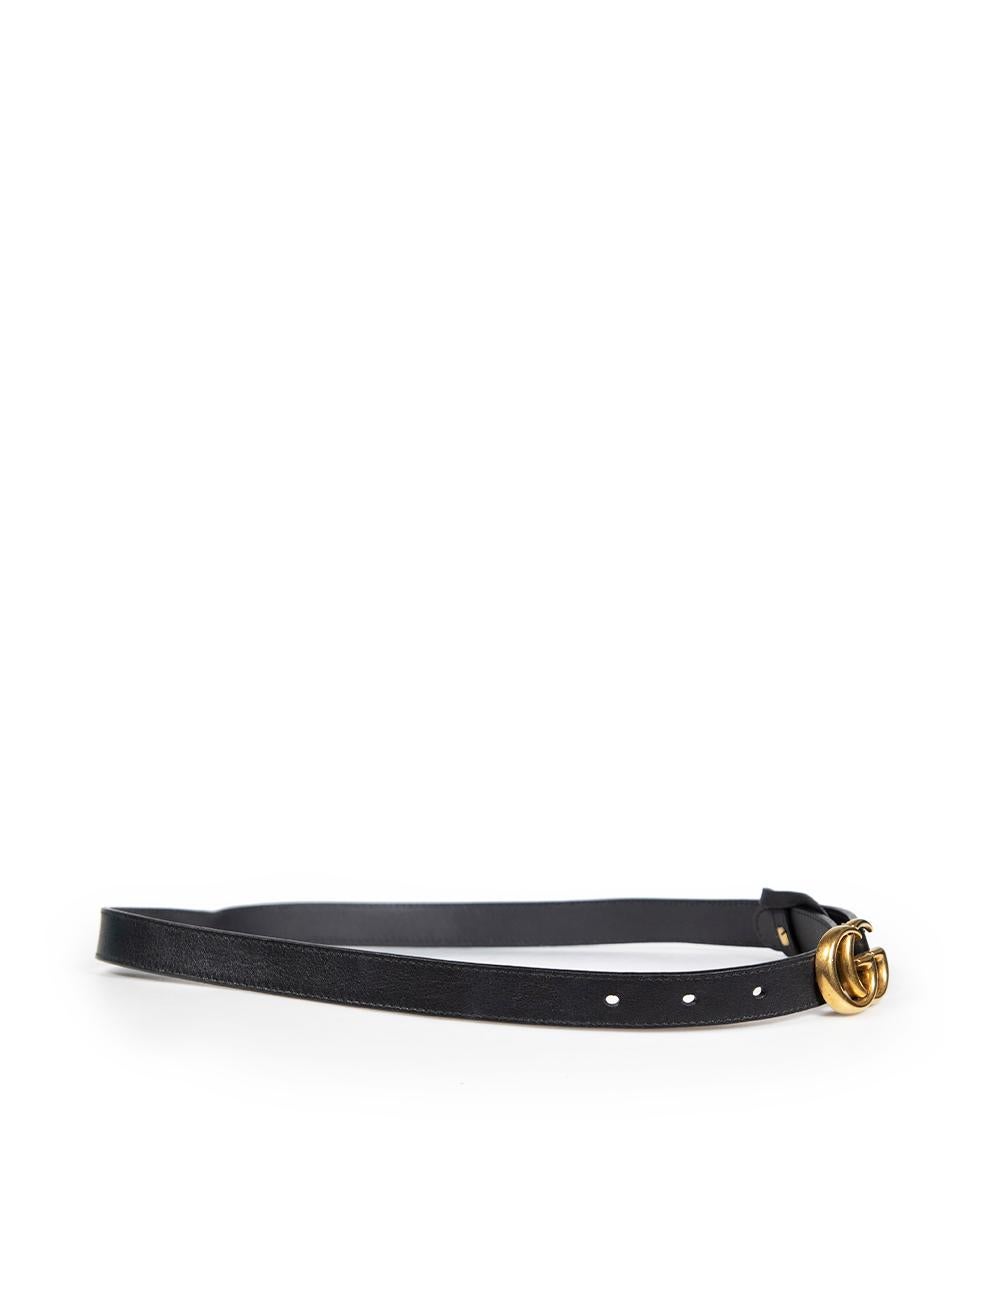 CONDITION is Very good. Hardly any visible wear to belt is evident on this used Gucci designer resale item.
 
 
 
 Details
 
 
 Black
 
 Leather
 
 Skinny belt
 
 Gold GG logo buckle
 
 
 
 
 
 Made in Italy
 
 
 
 Composition
 
 EXTERIOR: Leather
